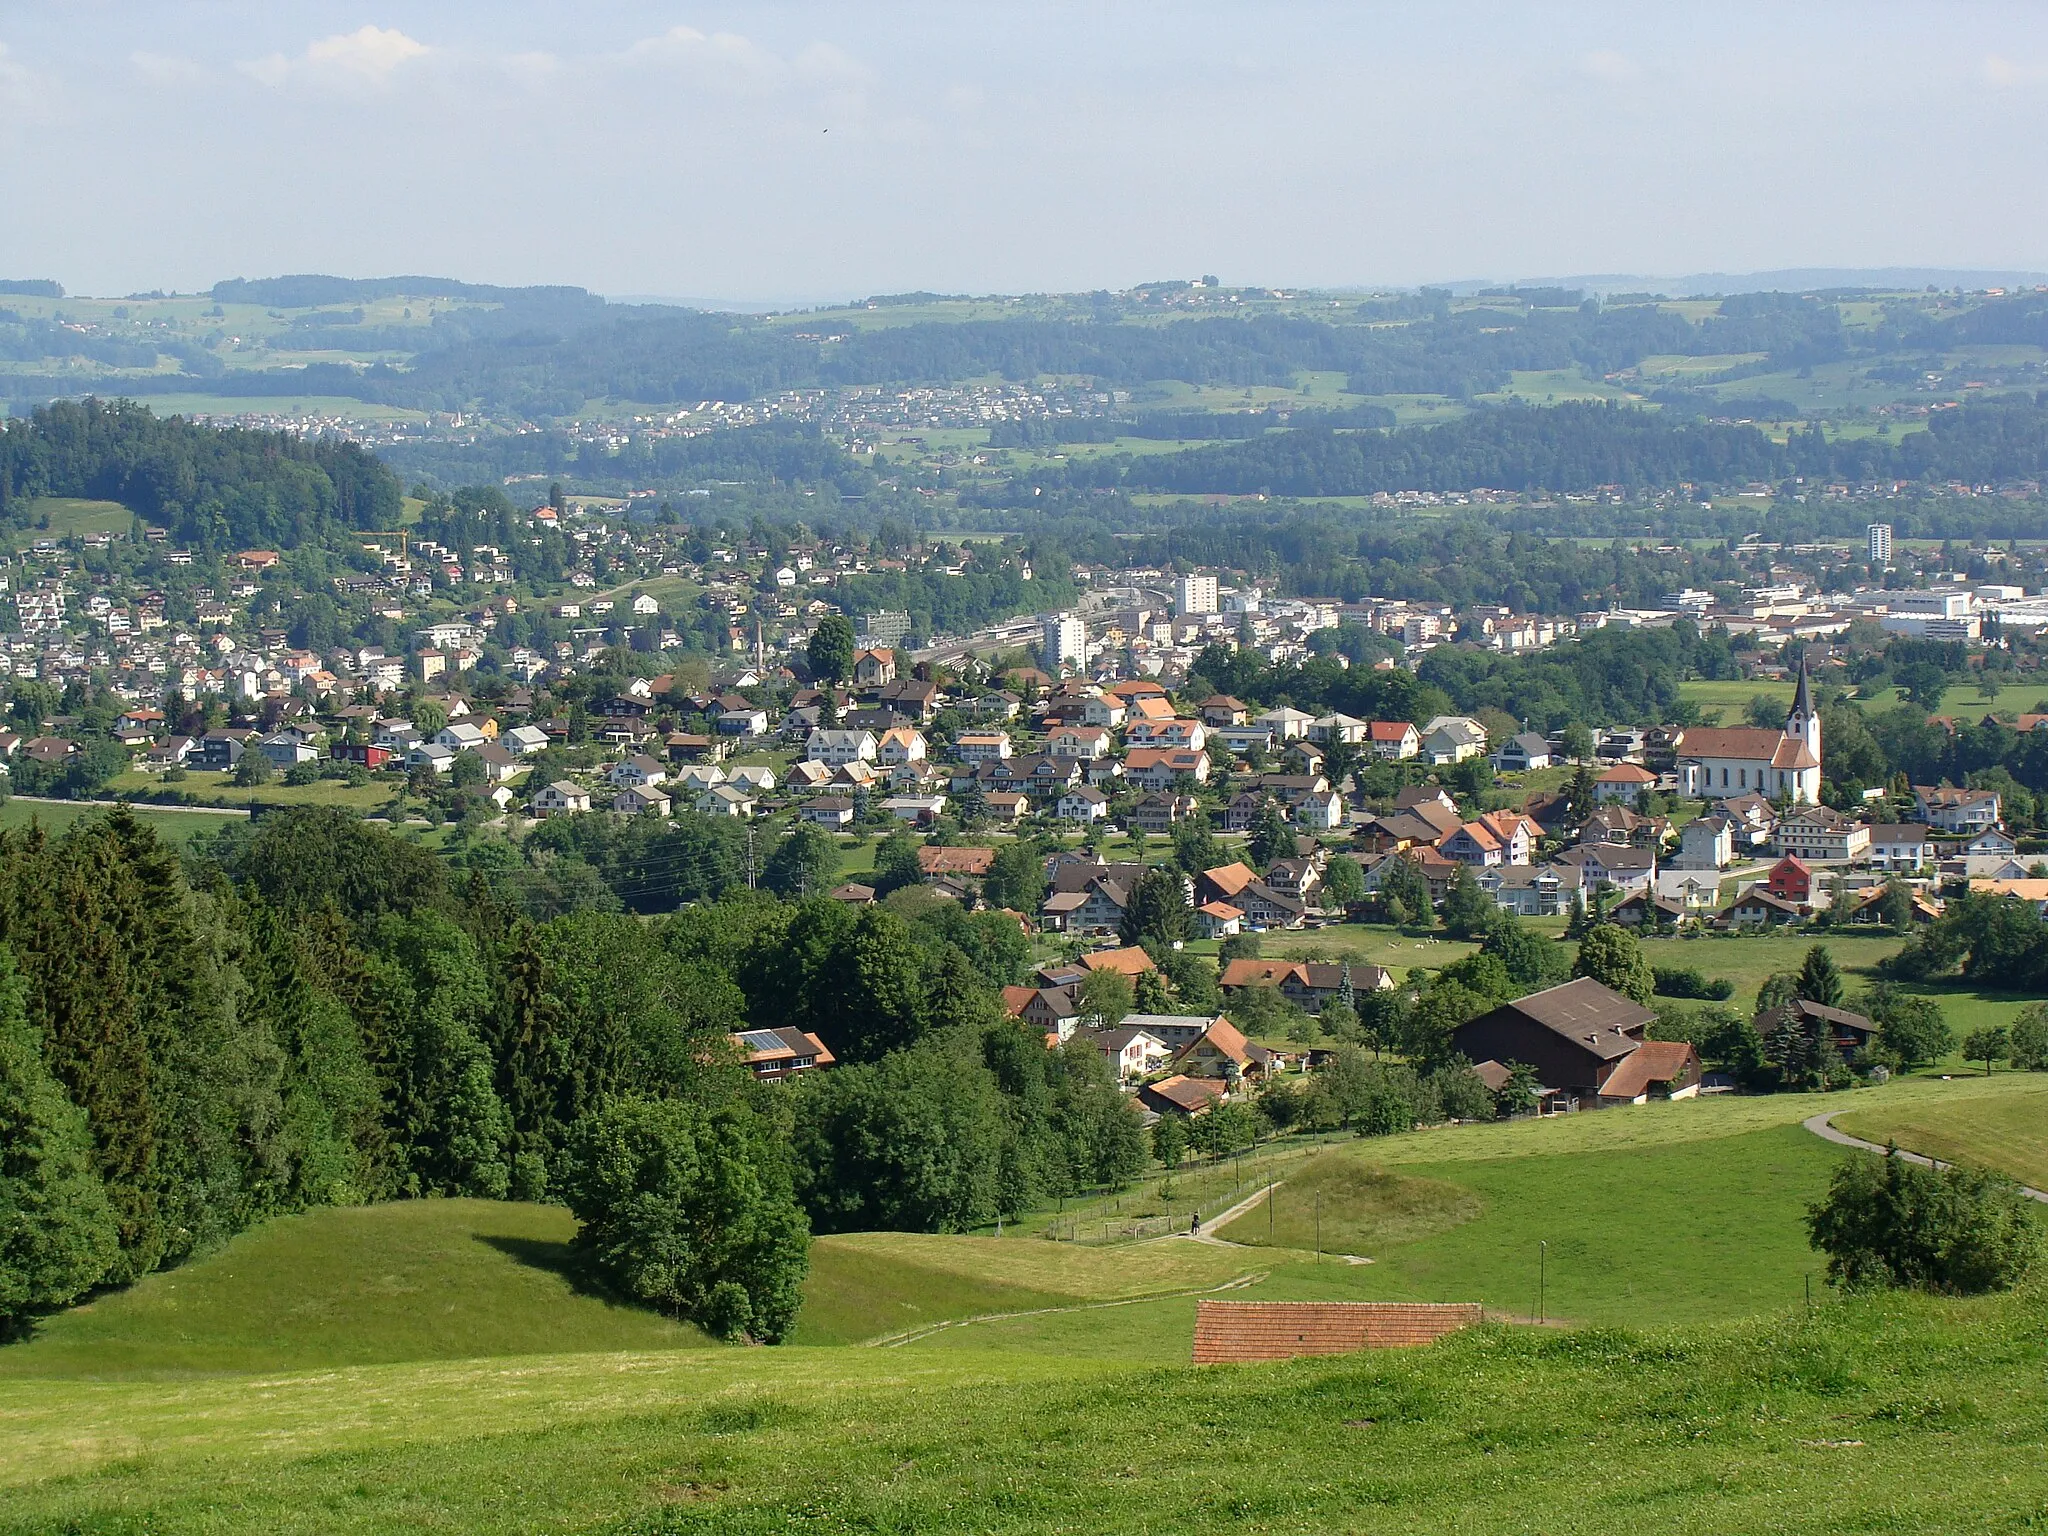 Image of Zuzwil